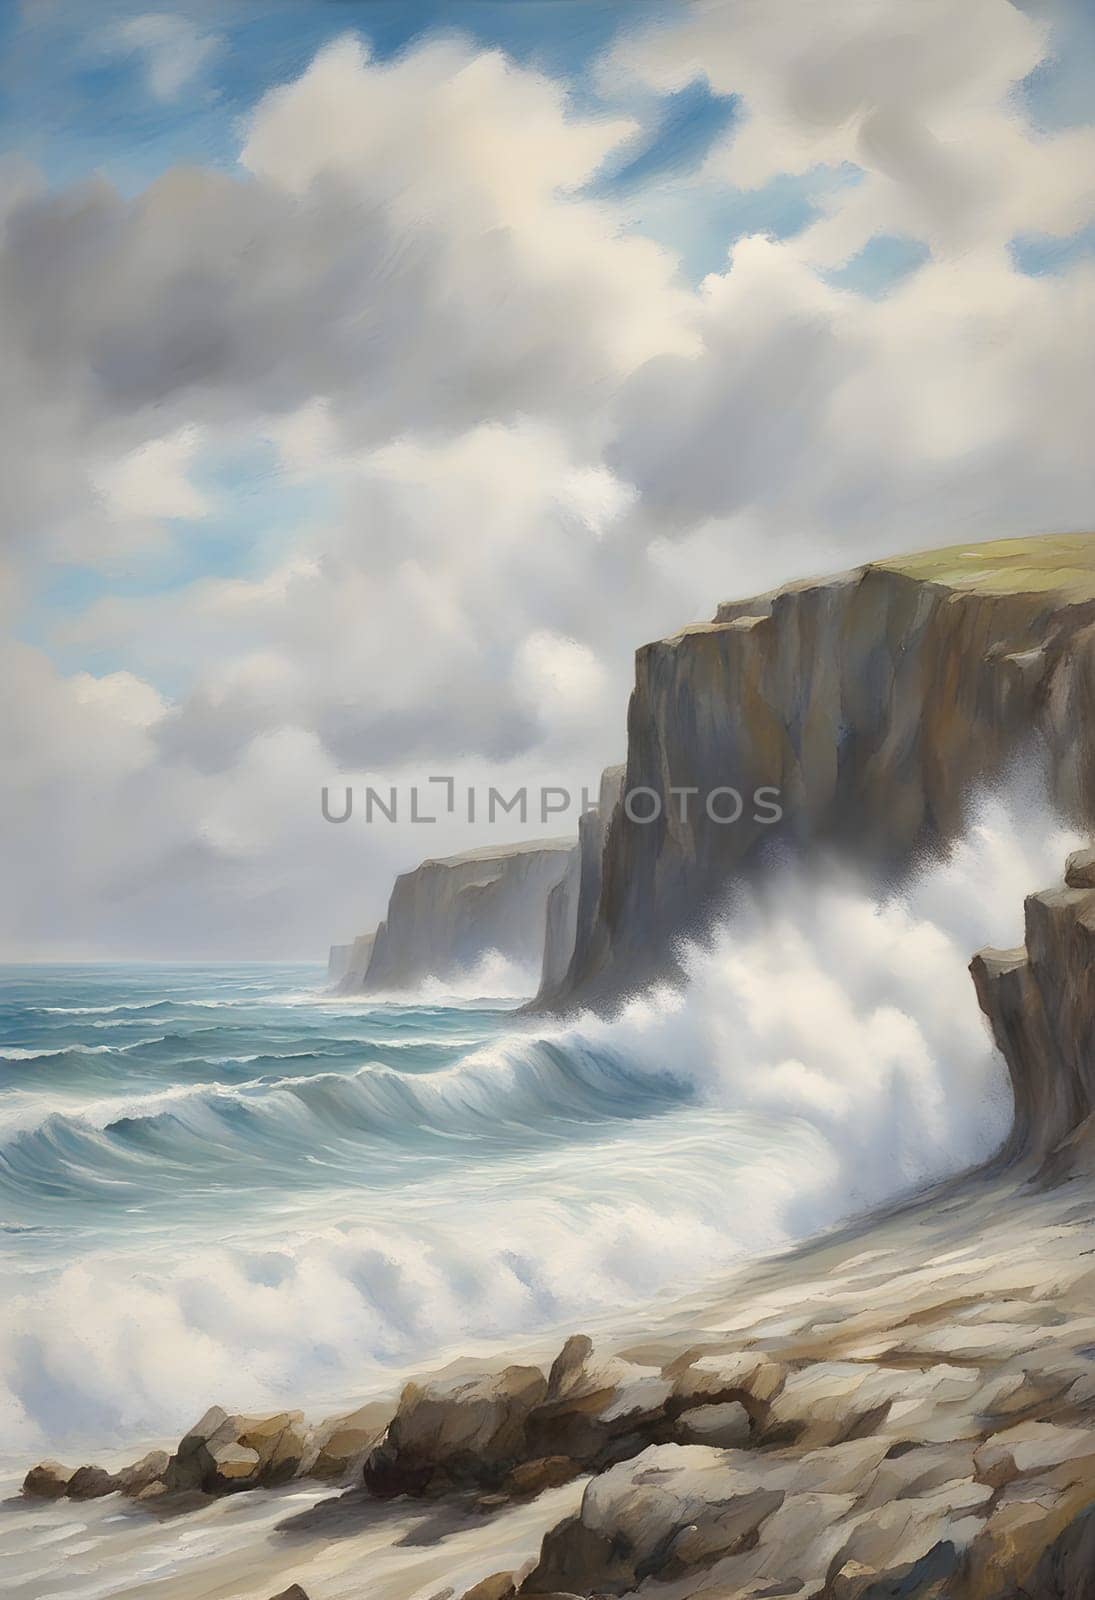 The image shows a painting of a beach with waves crashing against the cliffs. The waves are white and foamy and the cliffs are gray and rough. The sea is blue and there are white clouds in the sky. by rostik924